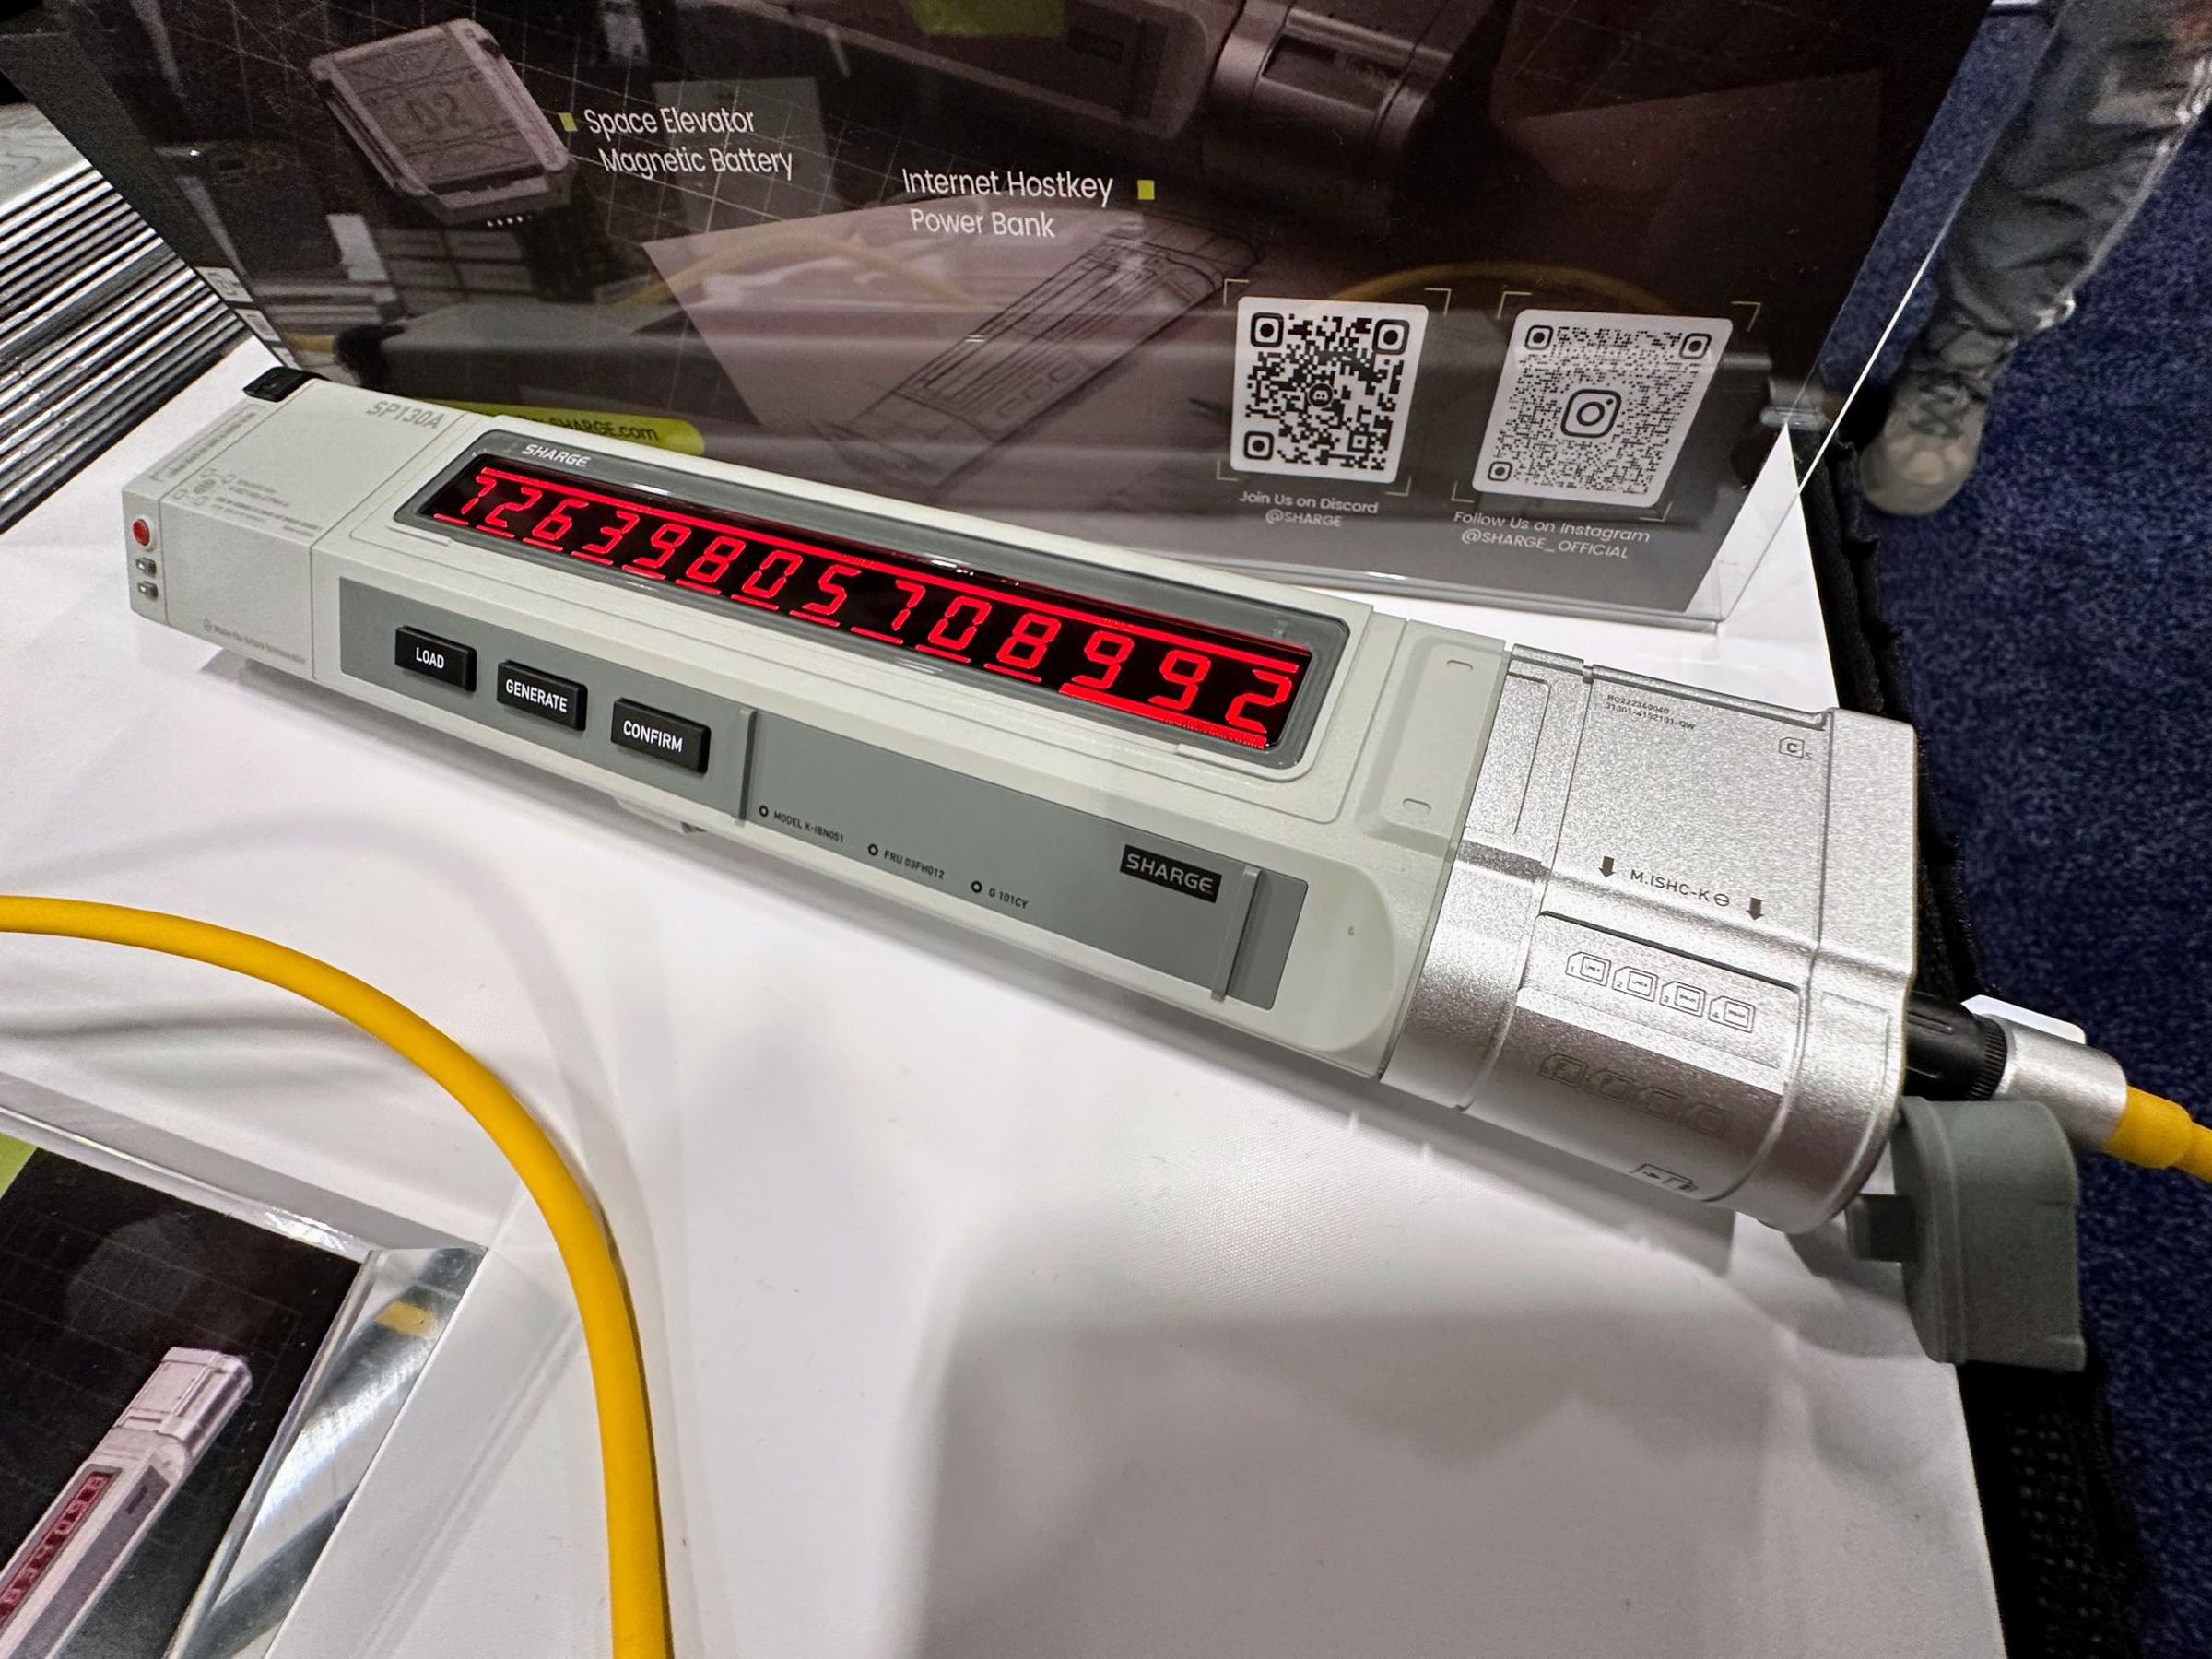 <em>Bet you haven’t seen a battery like this — it’s straight out of sci-fi film The Wandering Earth 2, and tops out at a 72Wh capacity. The buttons either show actual output on the screen, or a list of “passcodes” from the movie.</em>